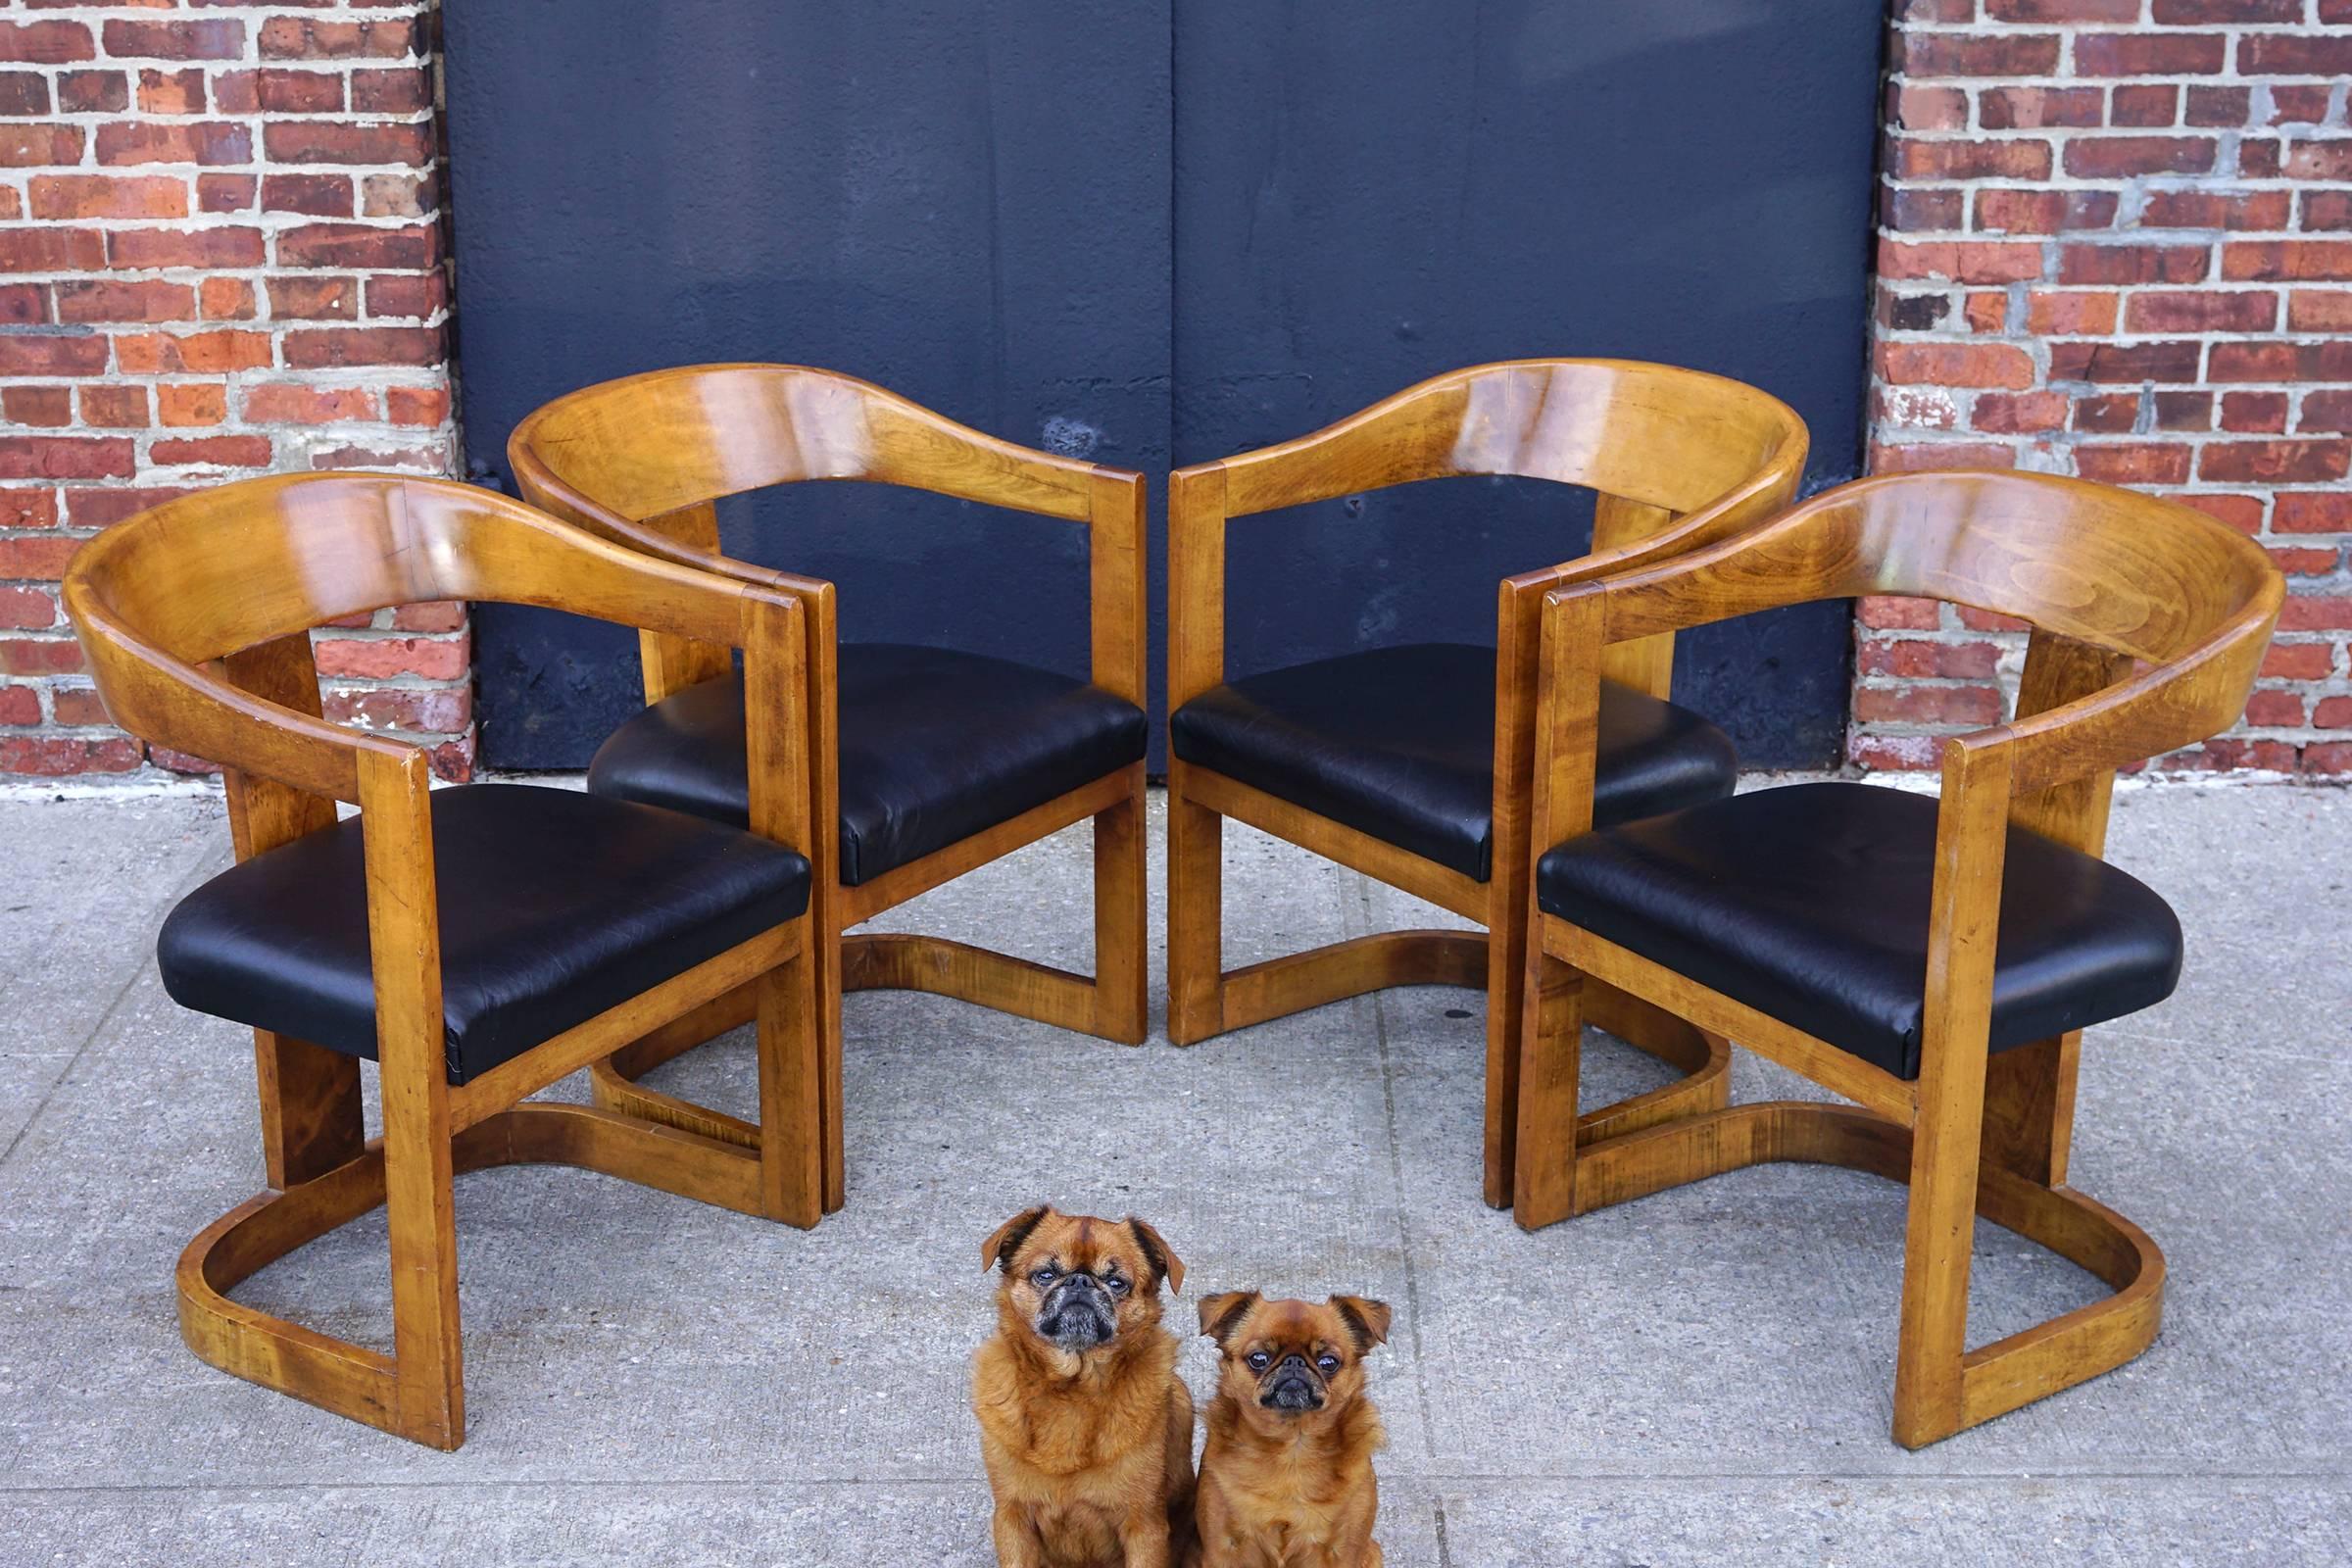 Lovely walnut frames with rich tone and natural patina. Original black leather upholstery. Comfortable, sturdy, and handsome.

Also available $2,800/pair.